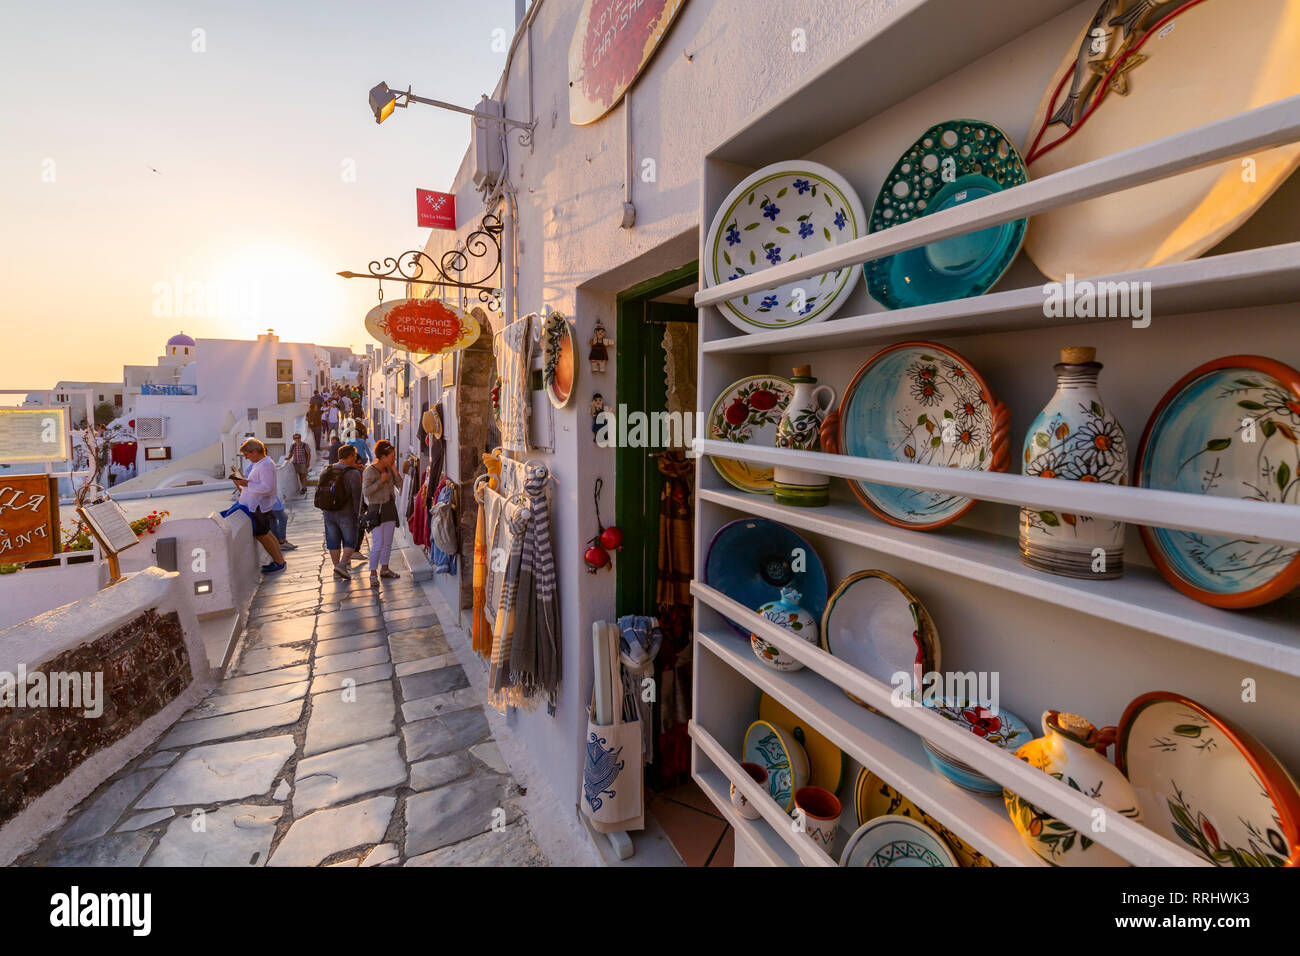 Shops selling souvenirs at Oia at sunset, Santorini, Cyclades, Aegean Islands, Greek Islands, Greece, Europe Stock Photo